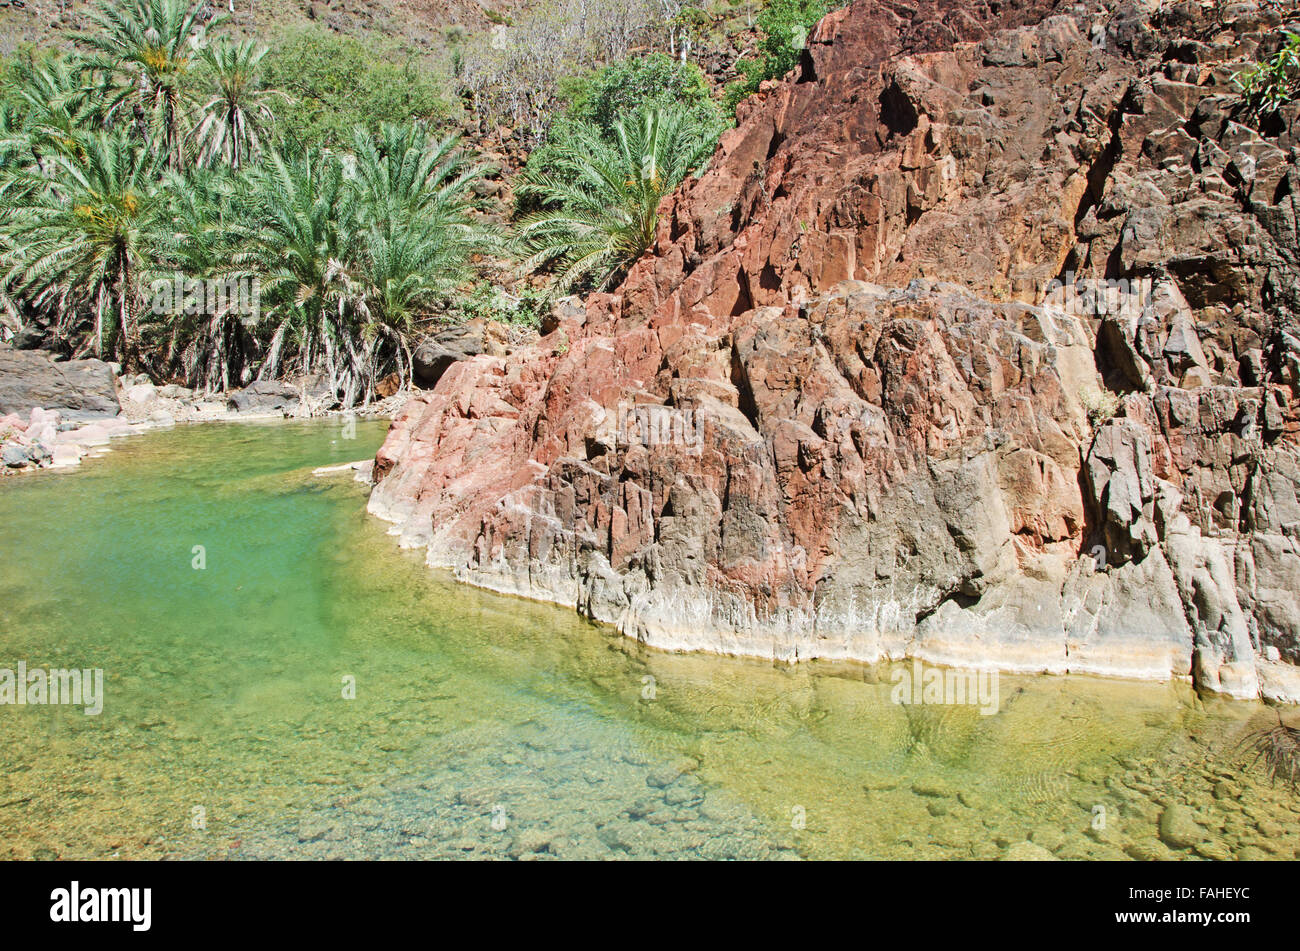 The oasis of Dirhur, natural pool in the protected area of Dixam Plateau, Gulf of Aden, Arabian Sea, Socotra Island, Yemen Stock Photo